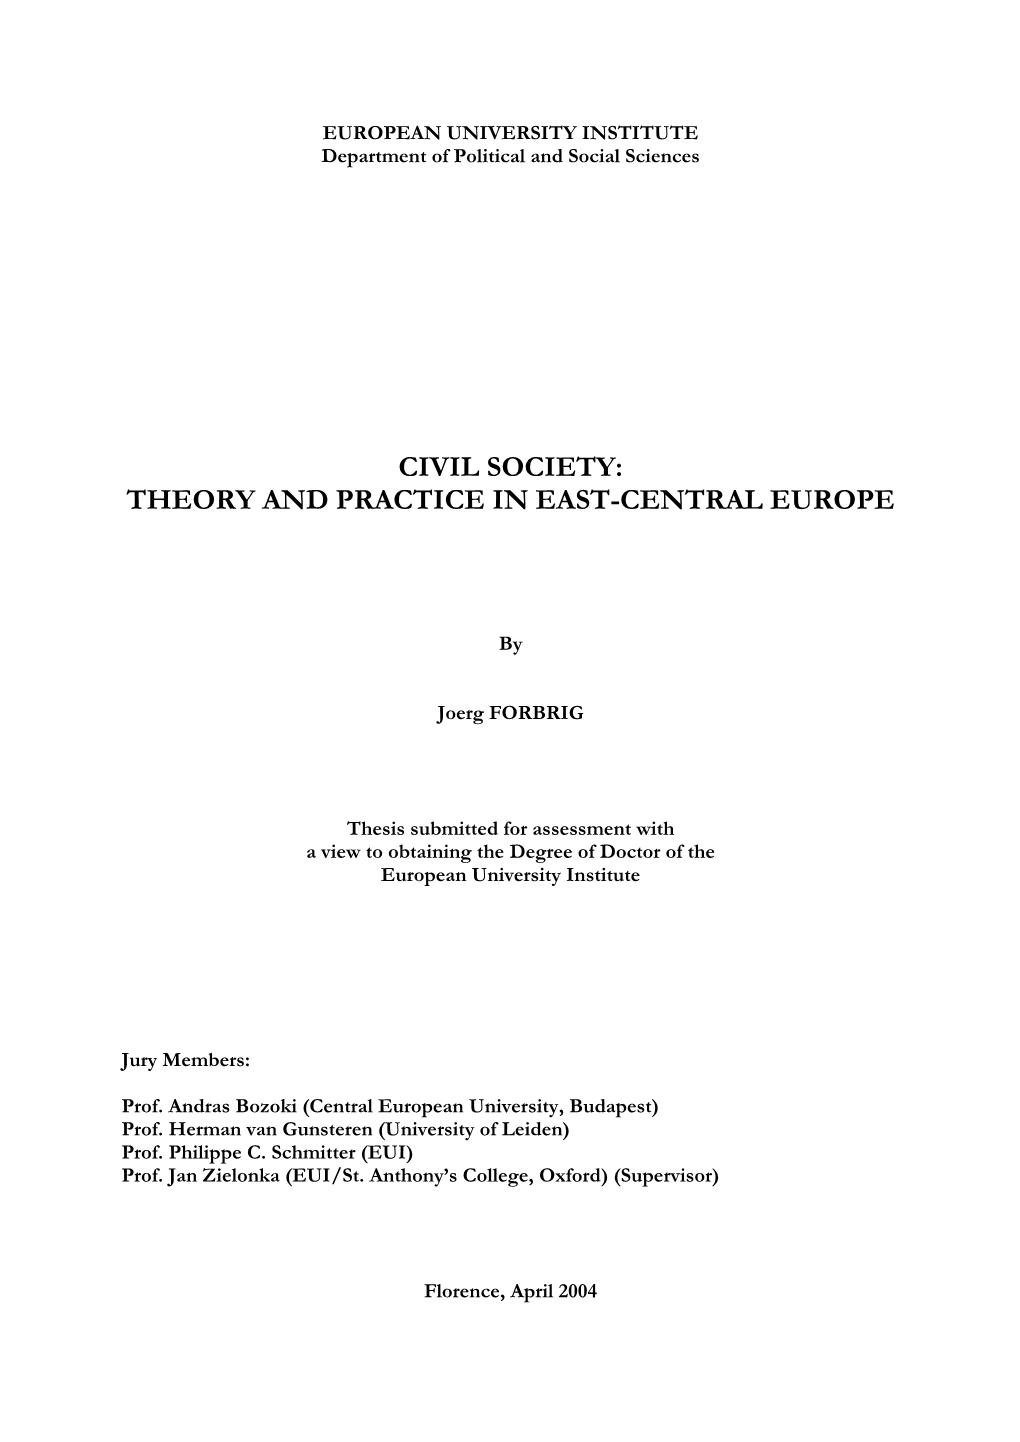 Civil Society: Theory and Practice in East-Central Europe